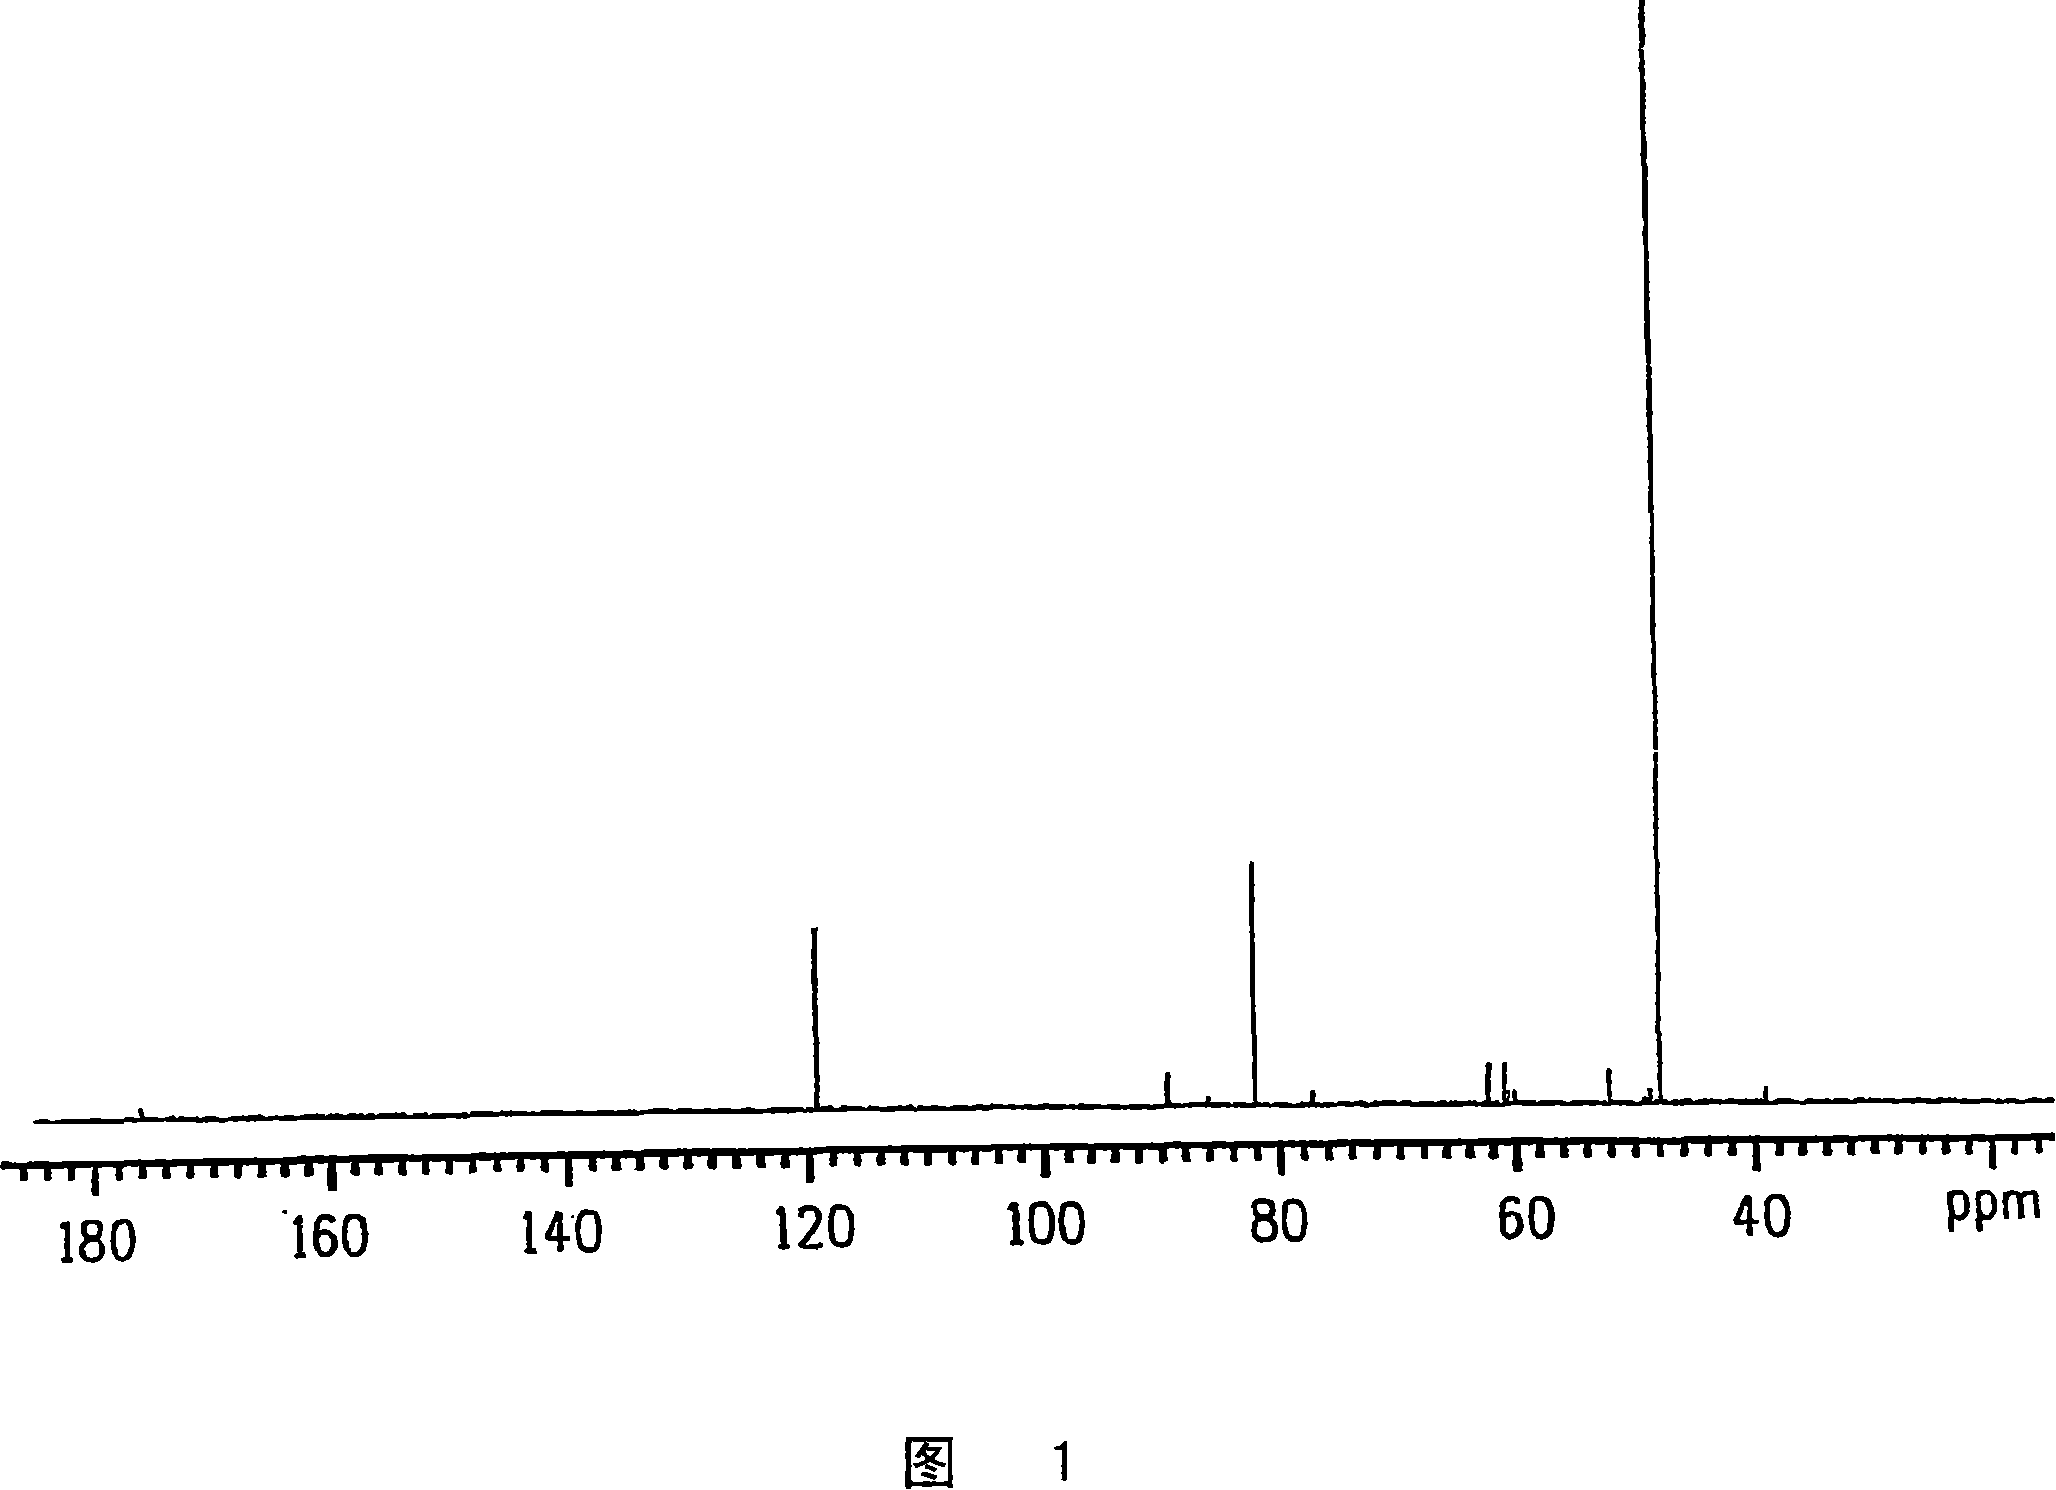 Process for producing glycolic acid from formaldehyde and hydrogen cyanide